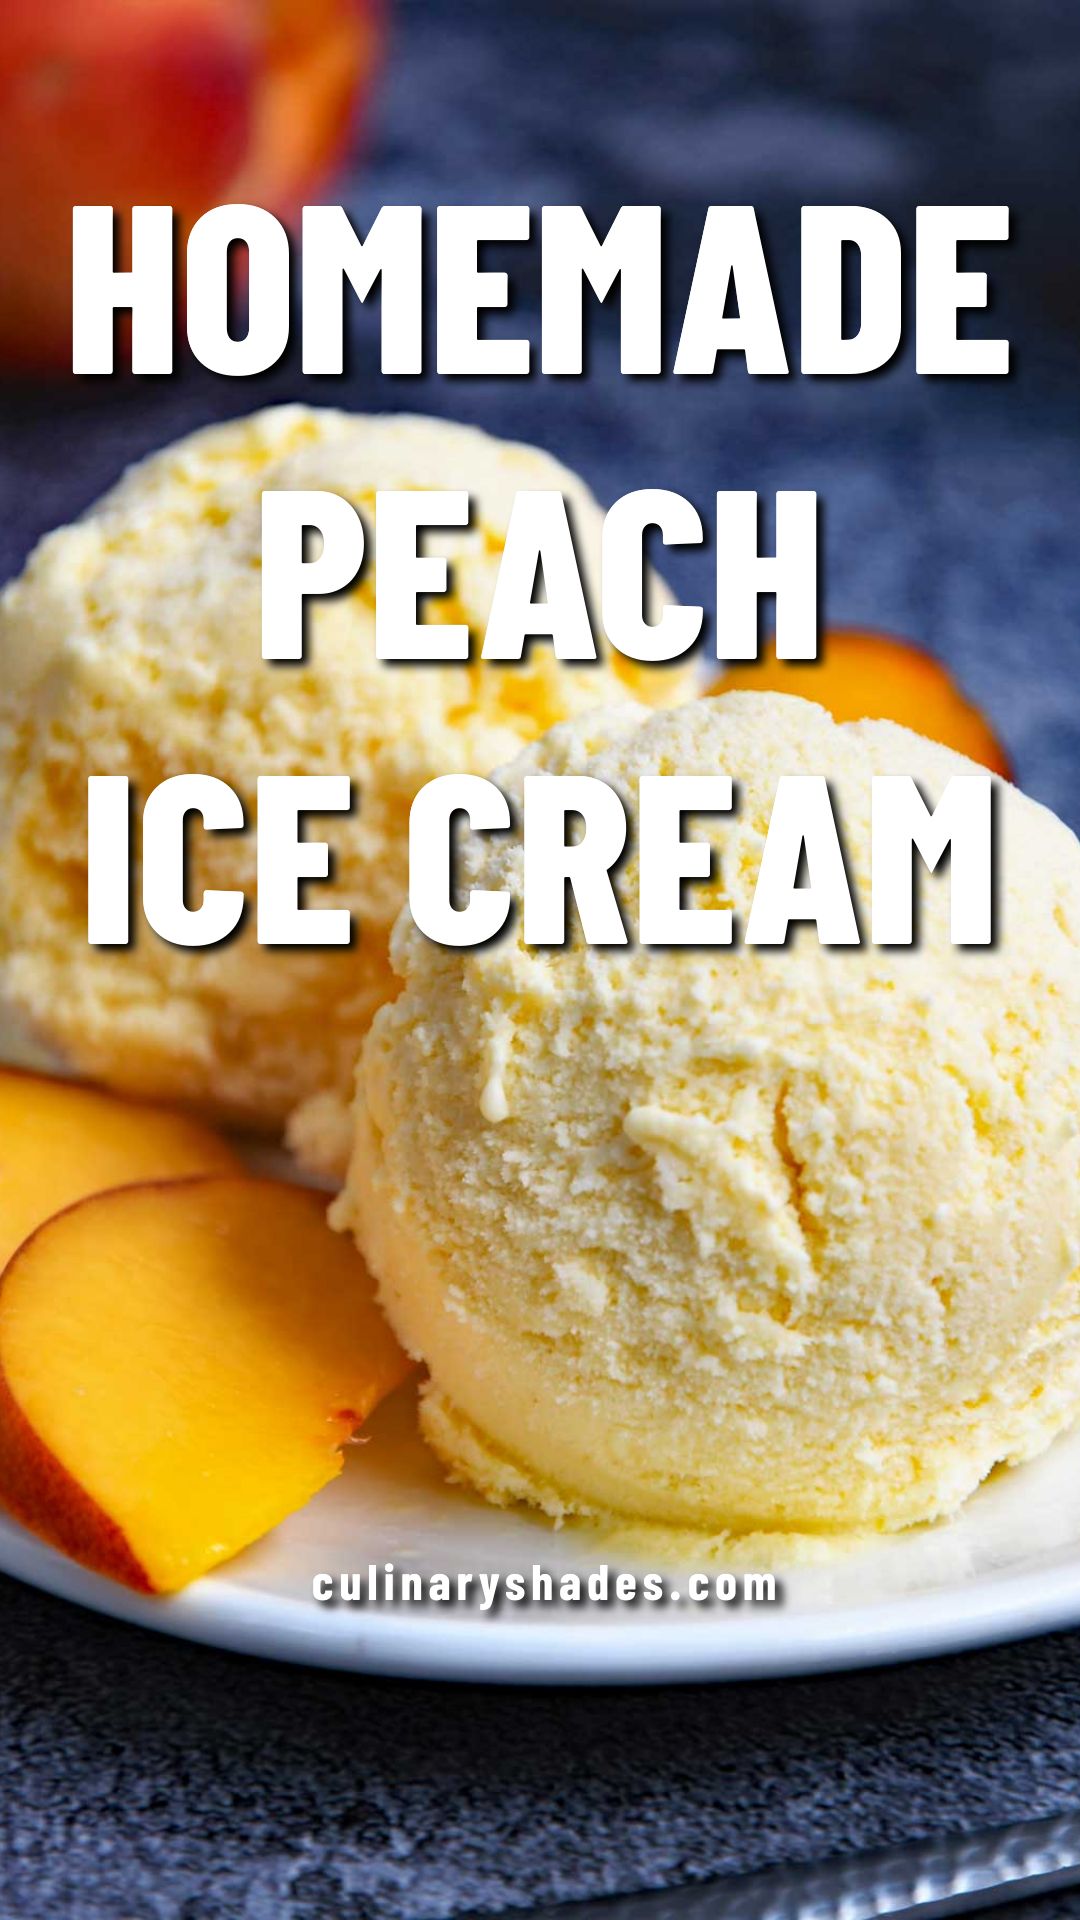 Peach ice-cream scoops in a plate with few peach slices.